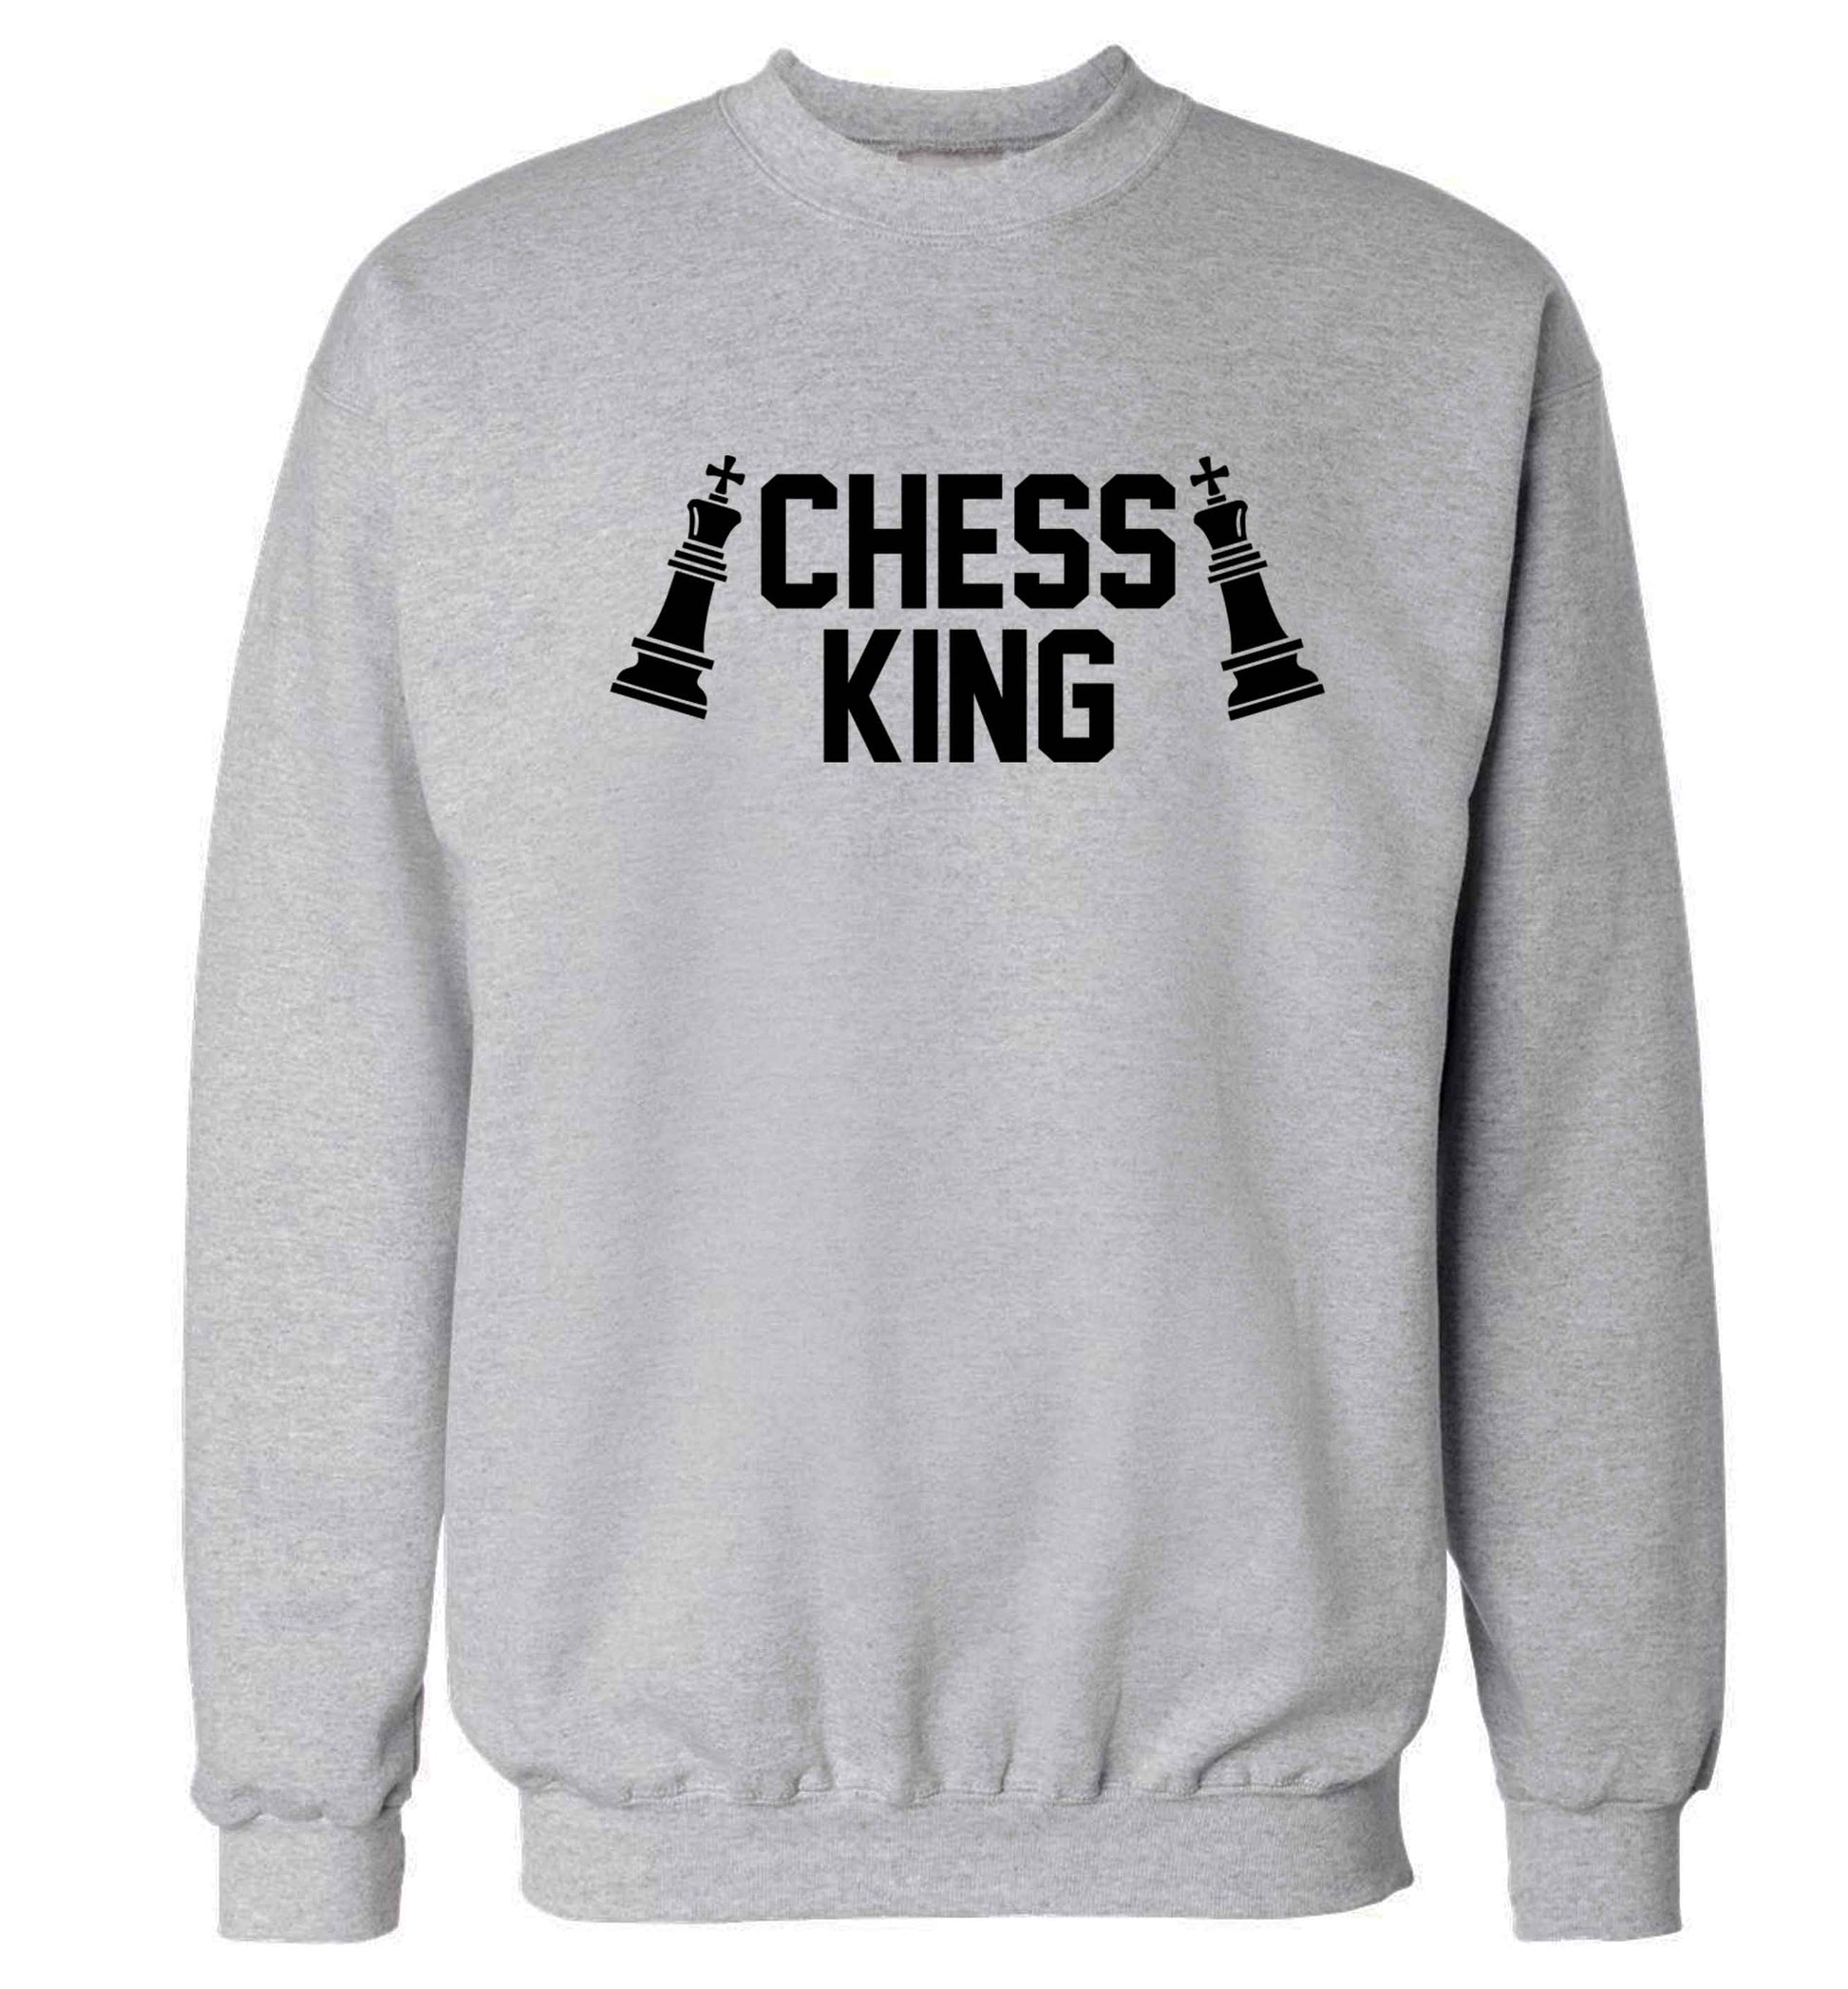 Chess king Adult's unisex grey Sweater 2XL